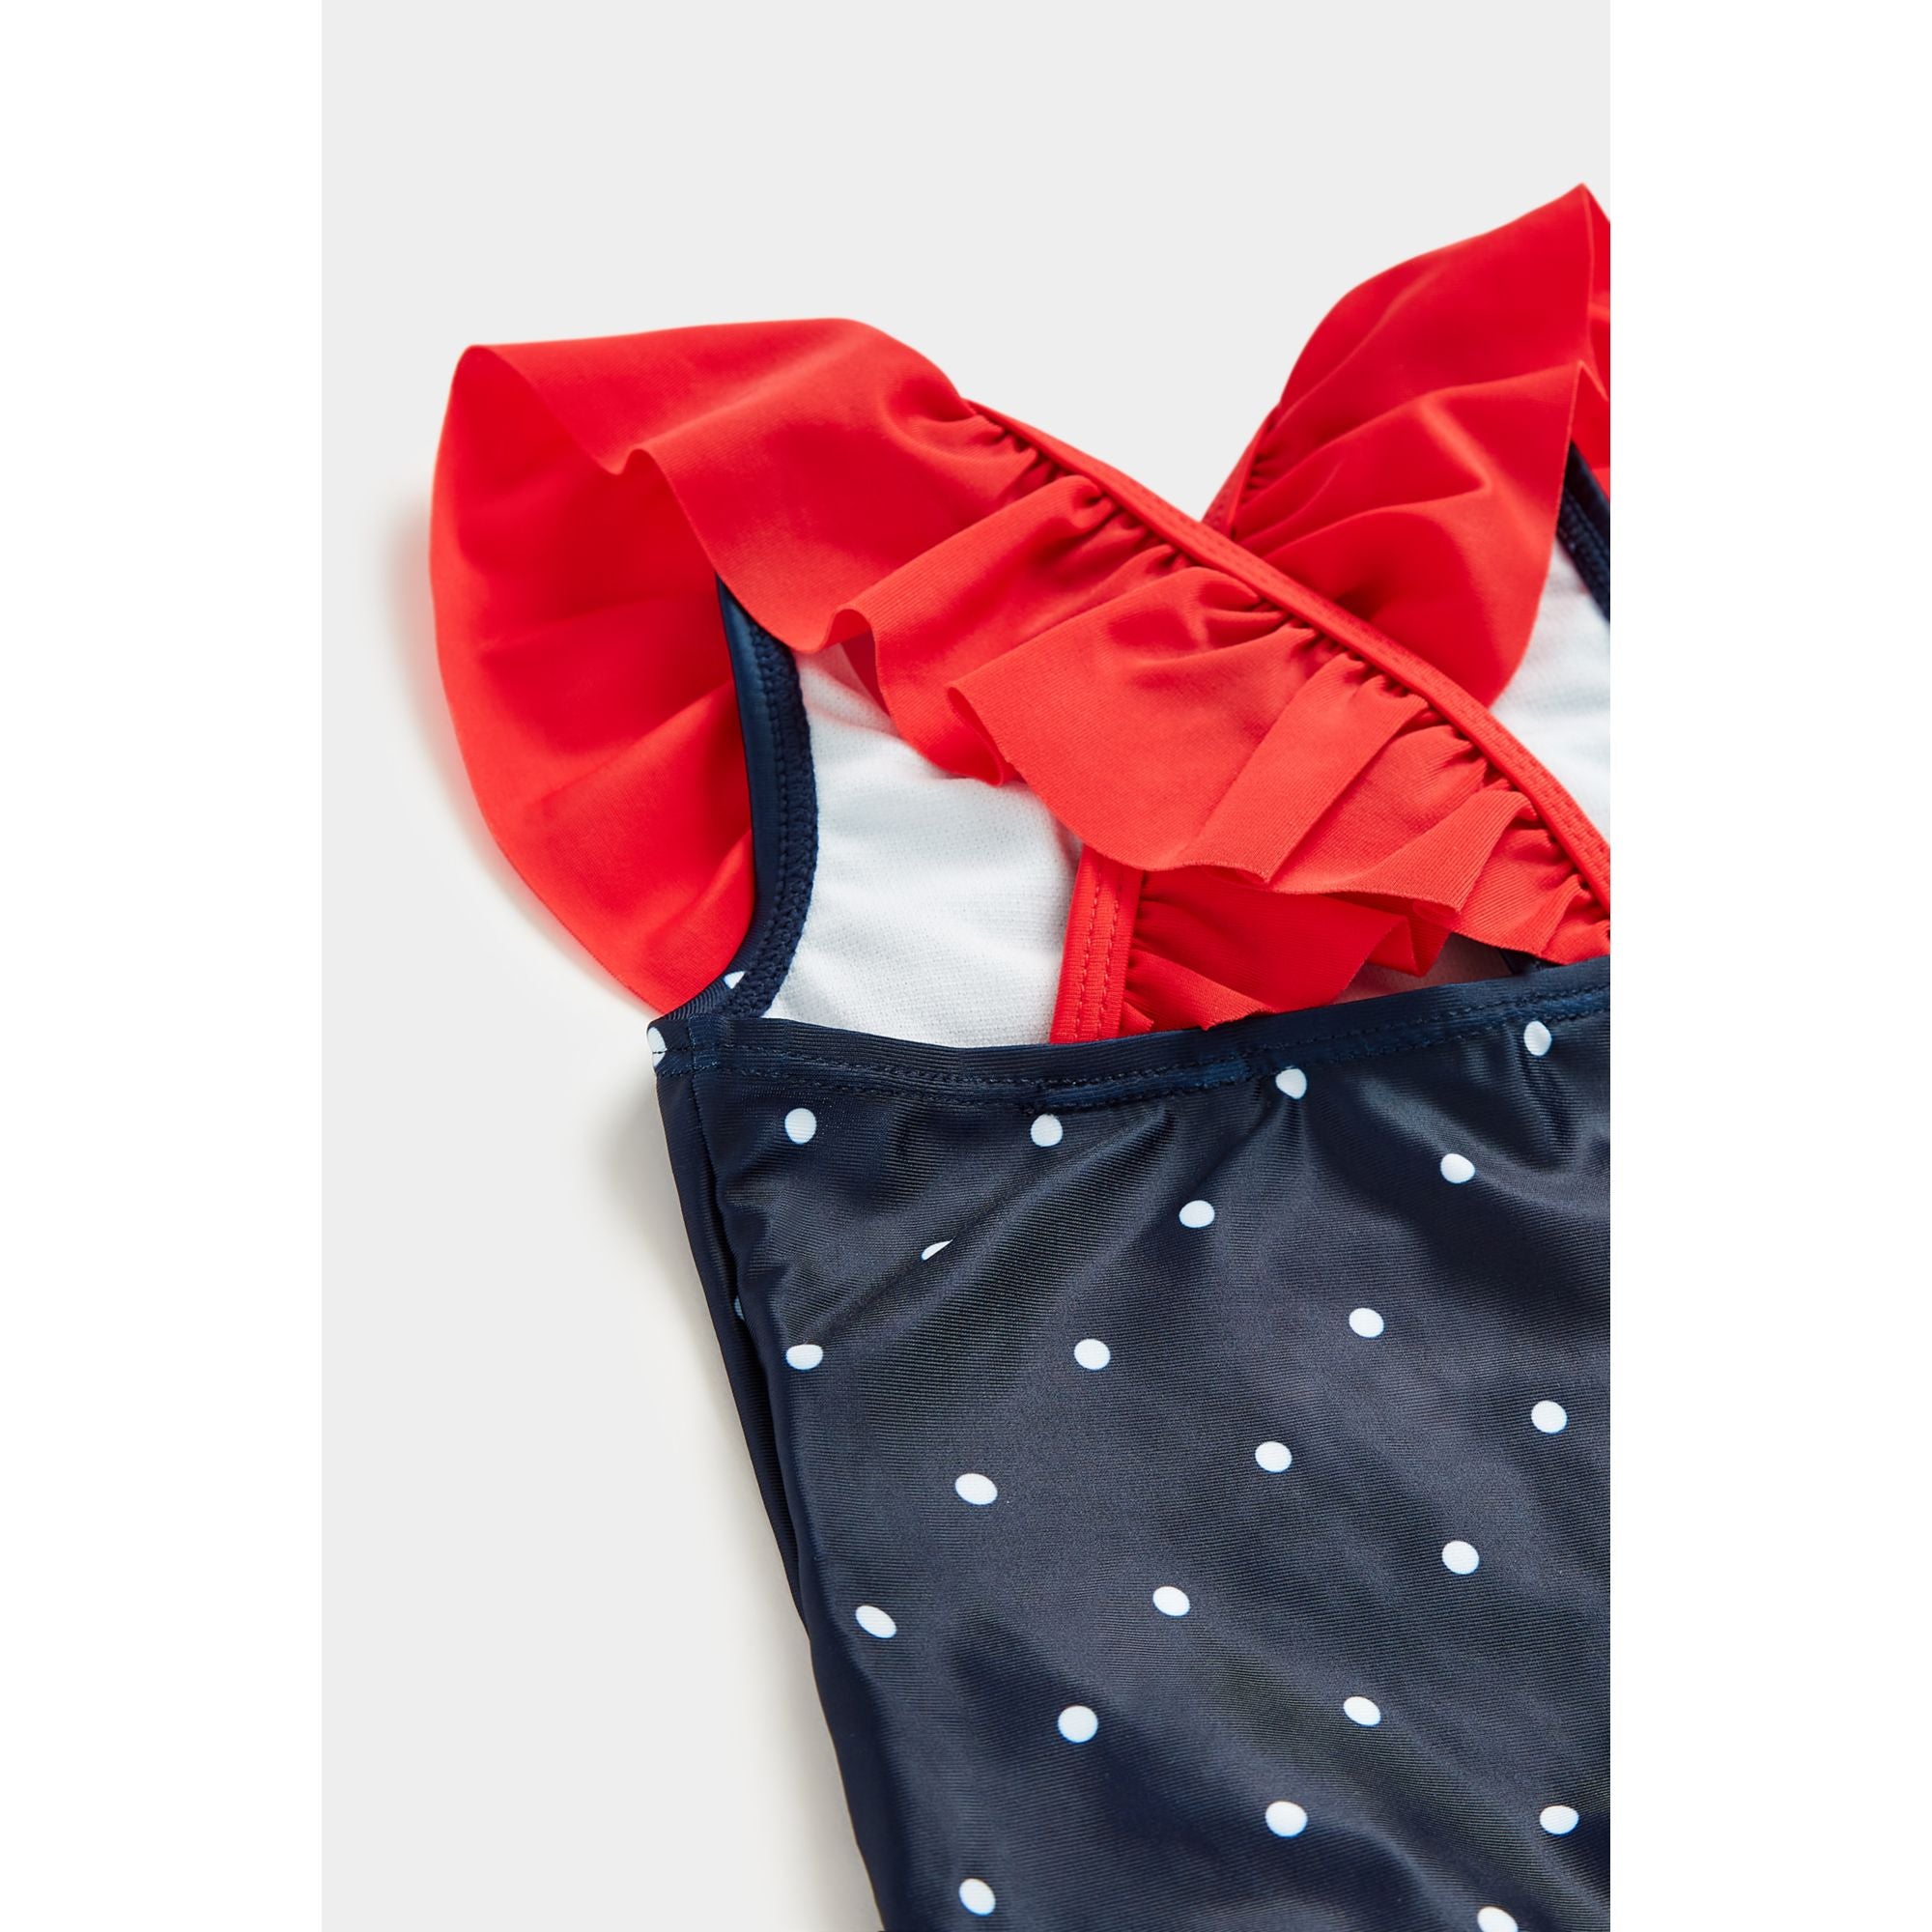 Mothercare Navy Spot Swimsuit